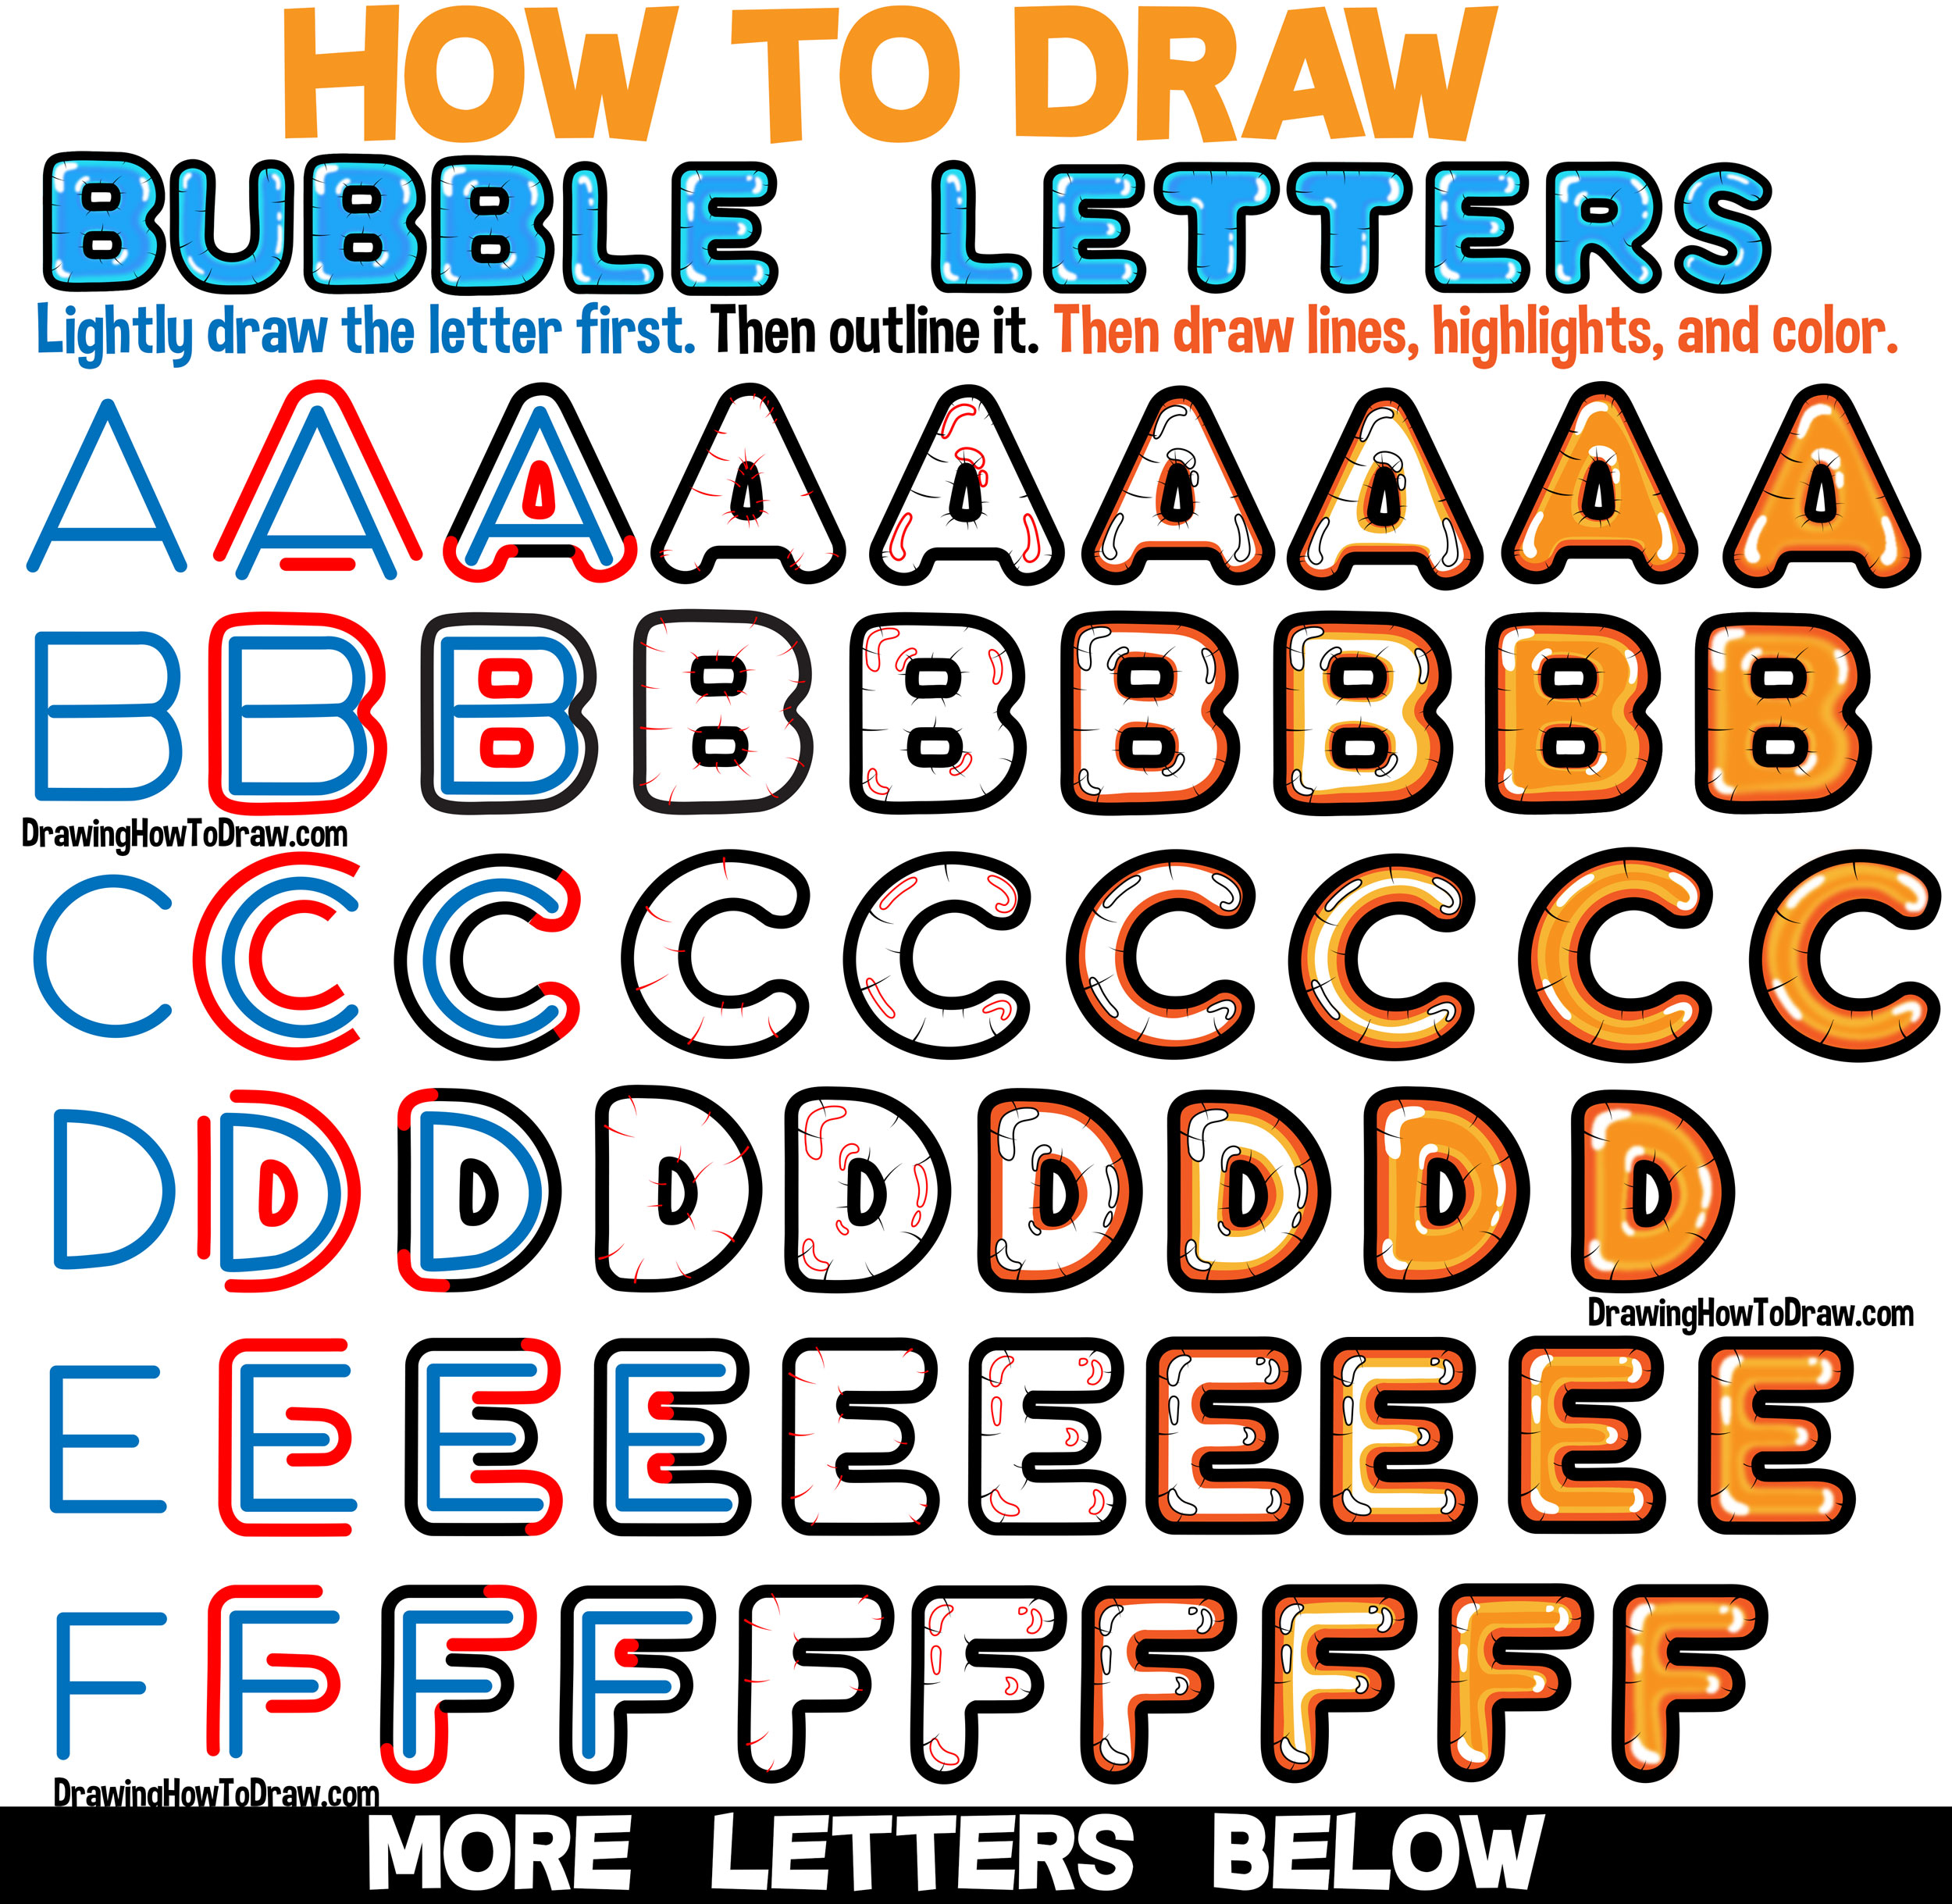 how-to-draw-bubble-letters-step-by-step-tutorial-2022-lettering-daily